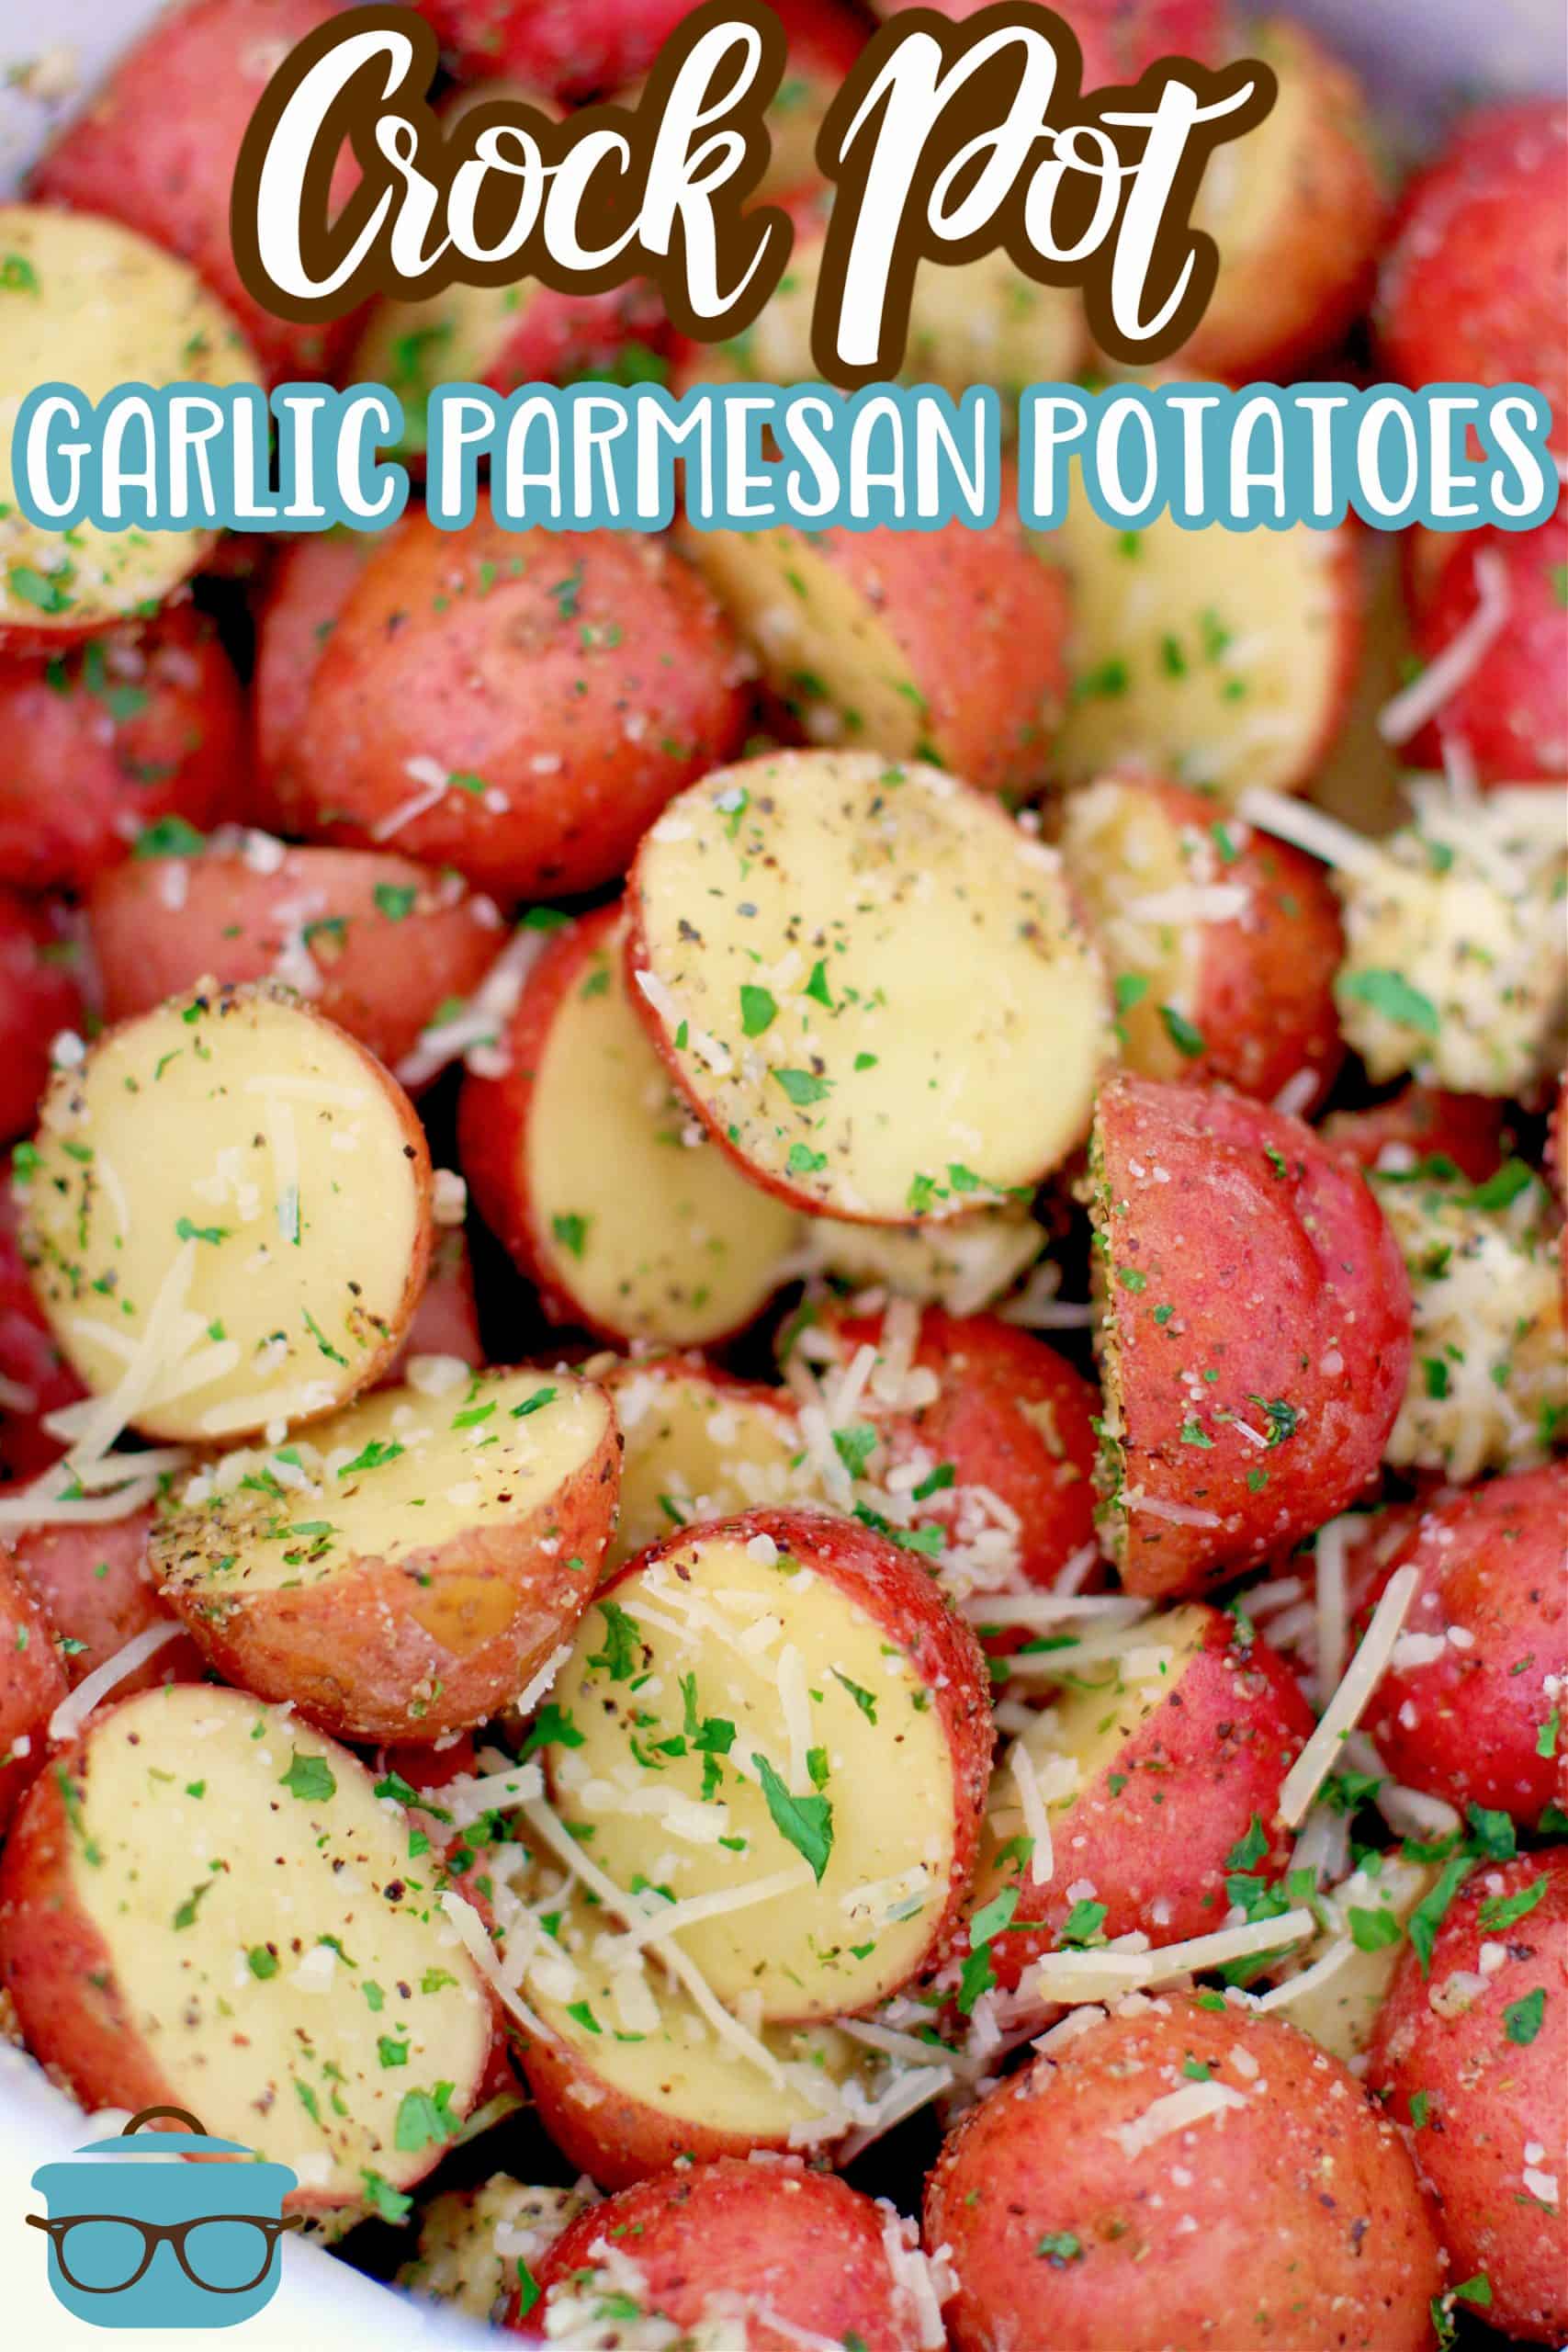 Crock Pot Garlic Parmesan Potatoes recipe from The Country Cook, sliced potatoes shown with seasoning and inside a white slow cooker.